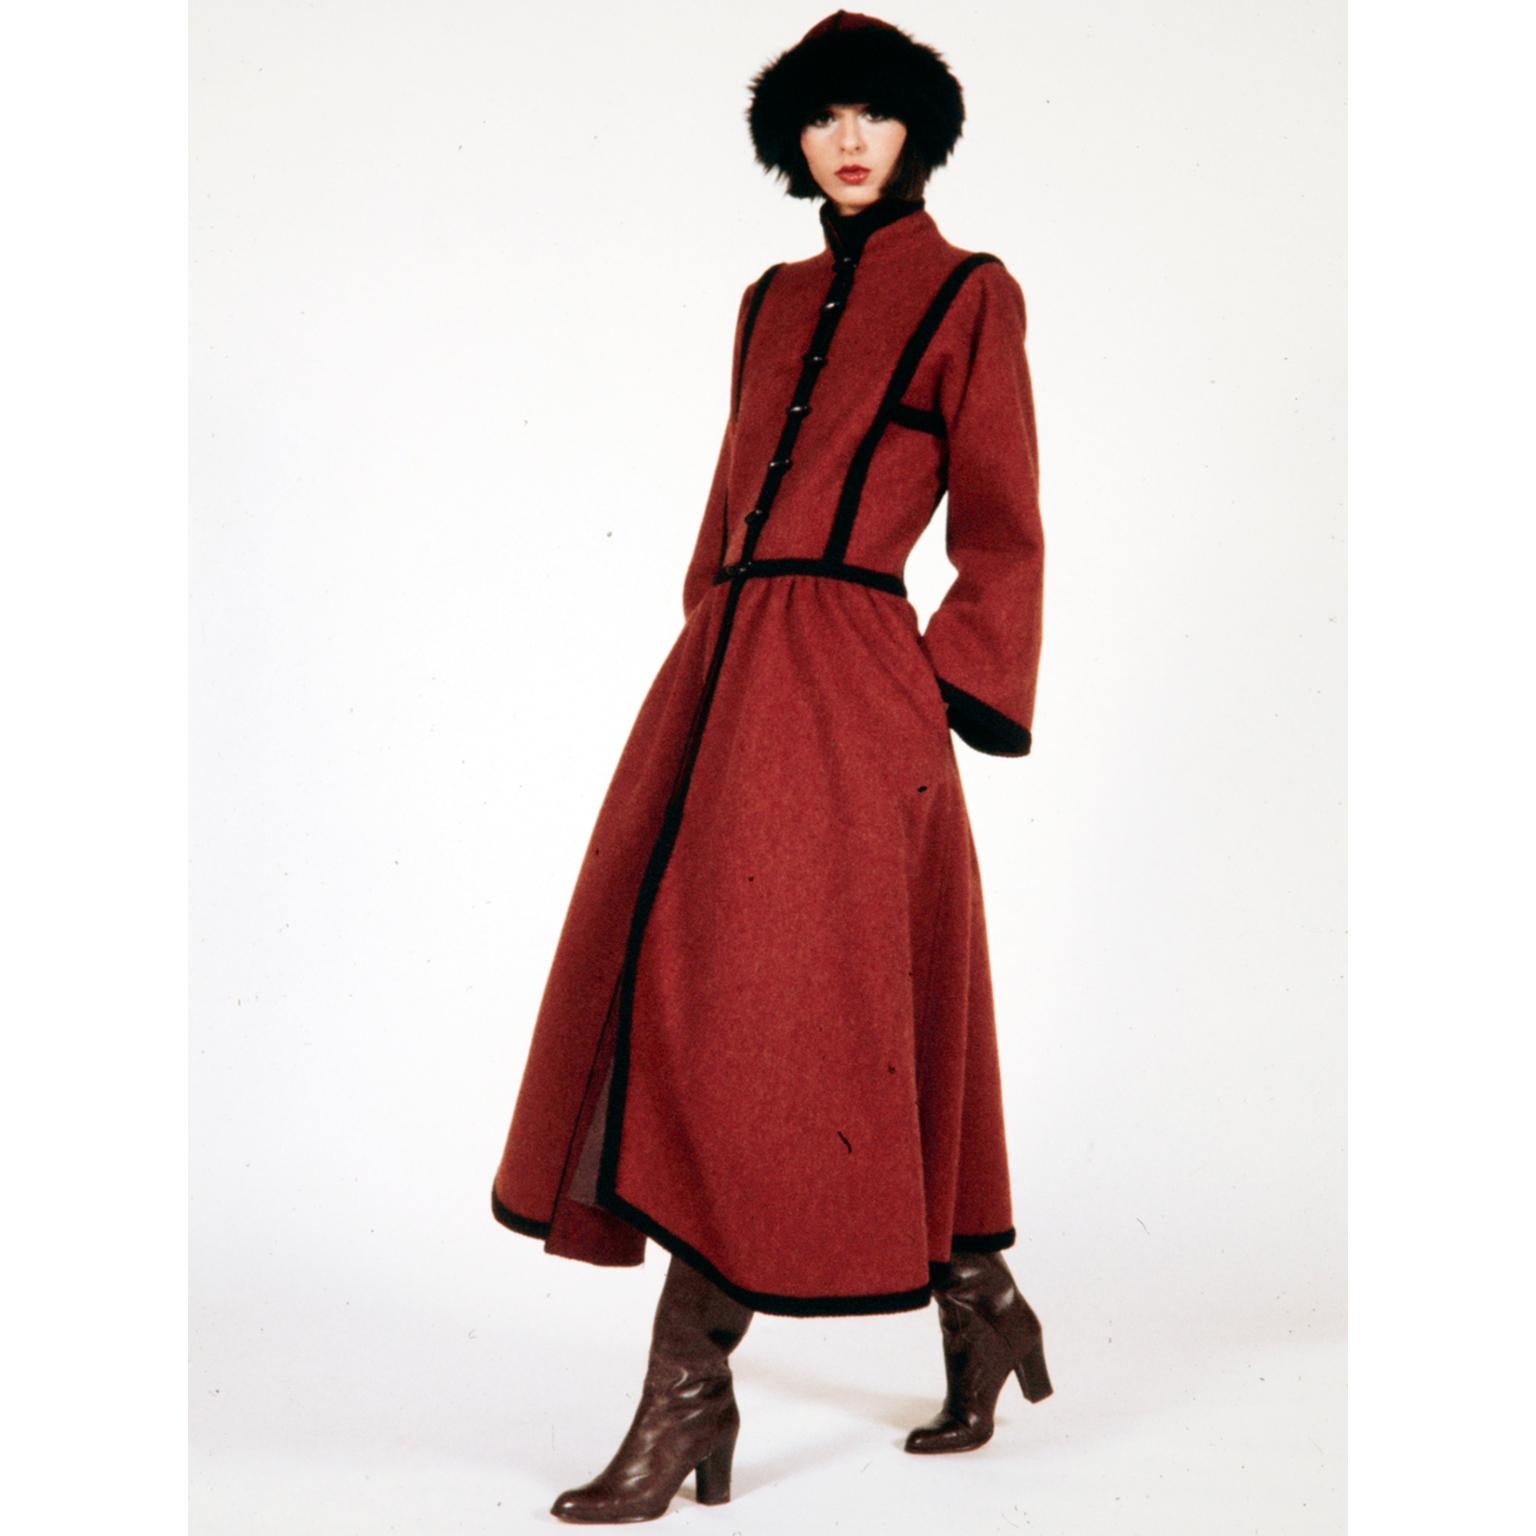 This 1976 YSL burgundy red wool Cossack style coat is an iconic piece from Yves Saint Laurent. This incredible coat was inspired by the Haute Couture Ballet Russes Collection and the quality and details are exceptional. Saint Laurent was inspired by